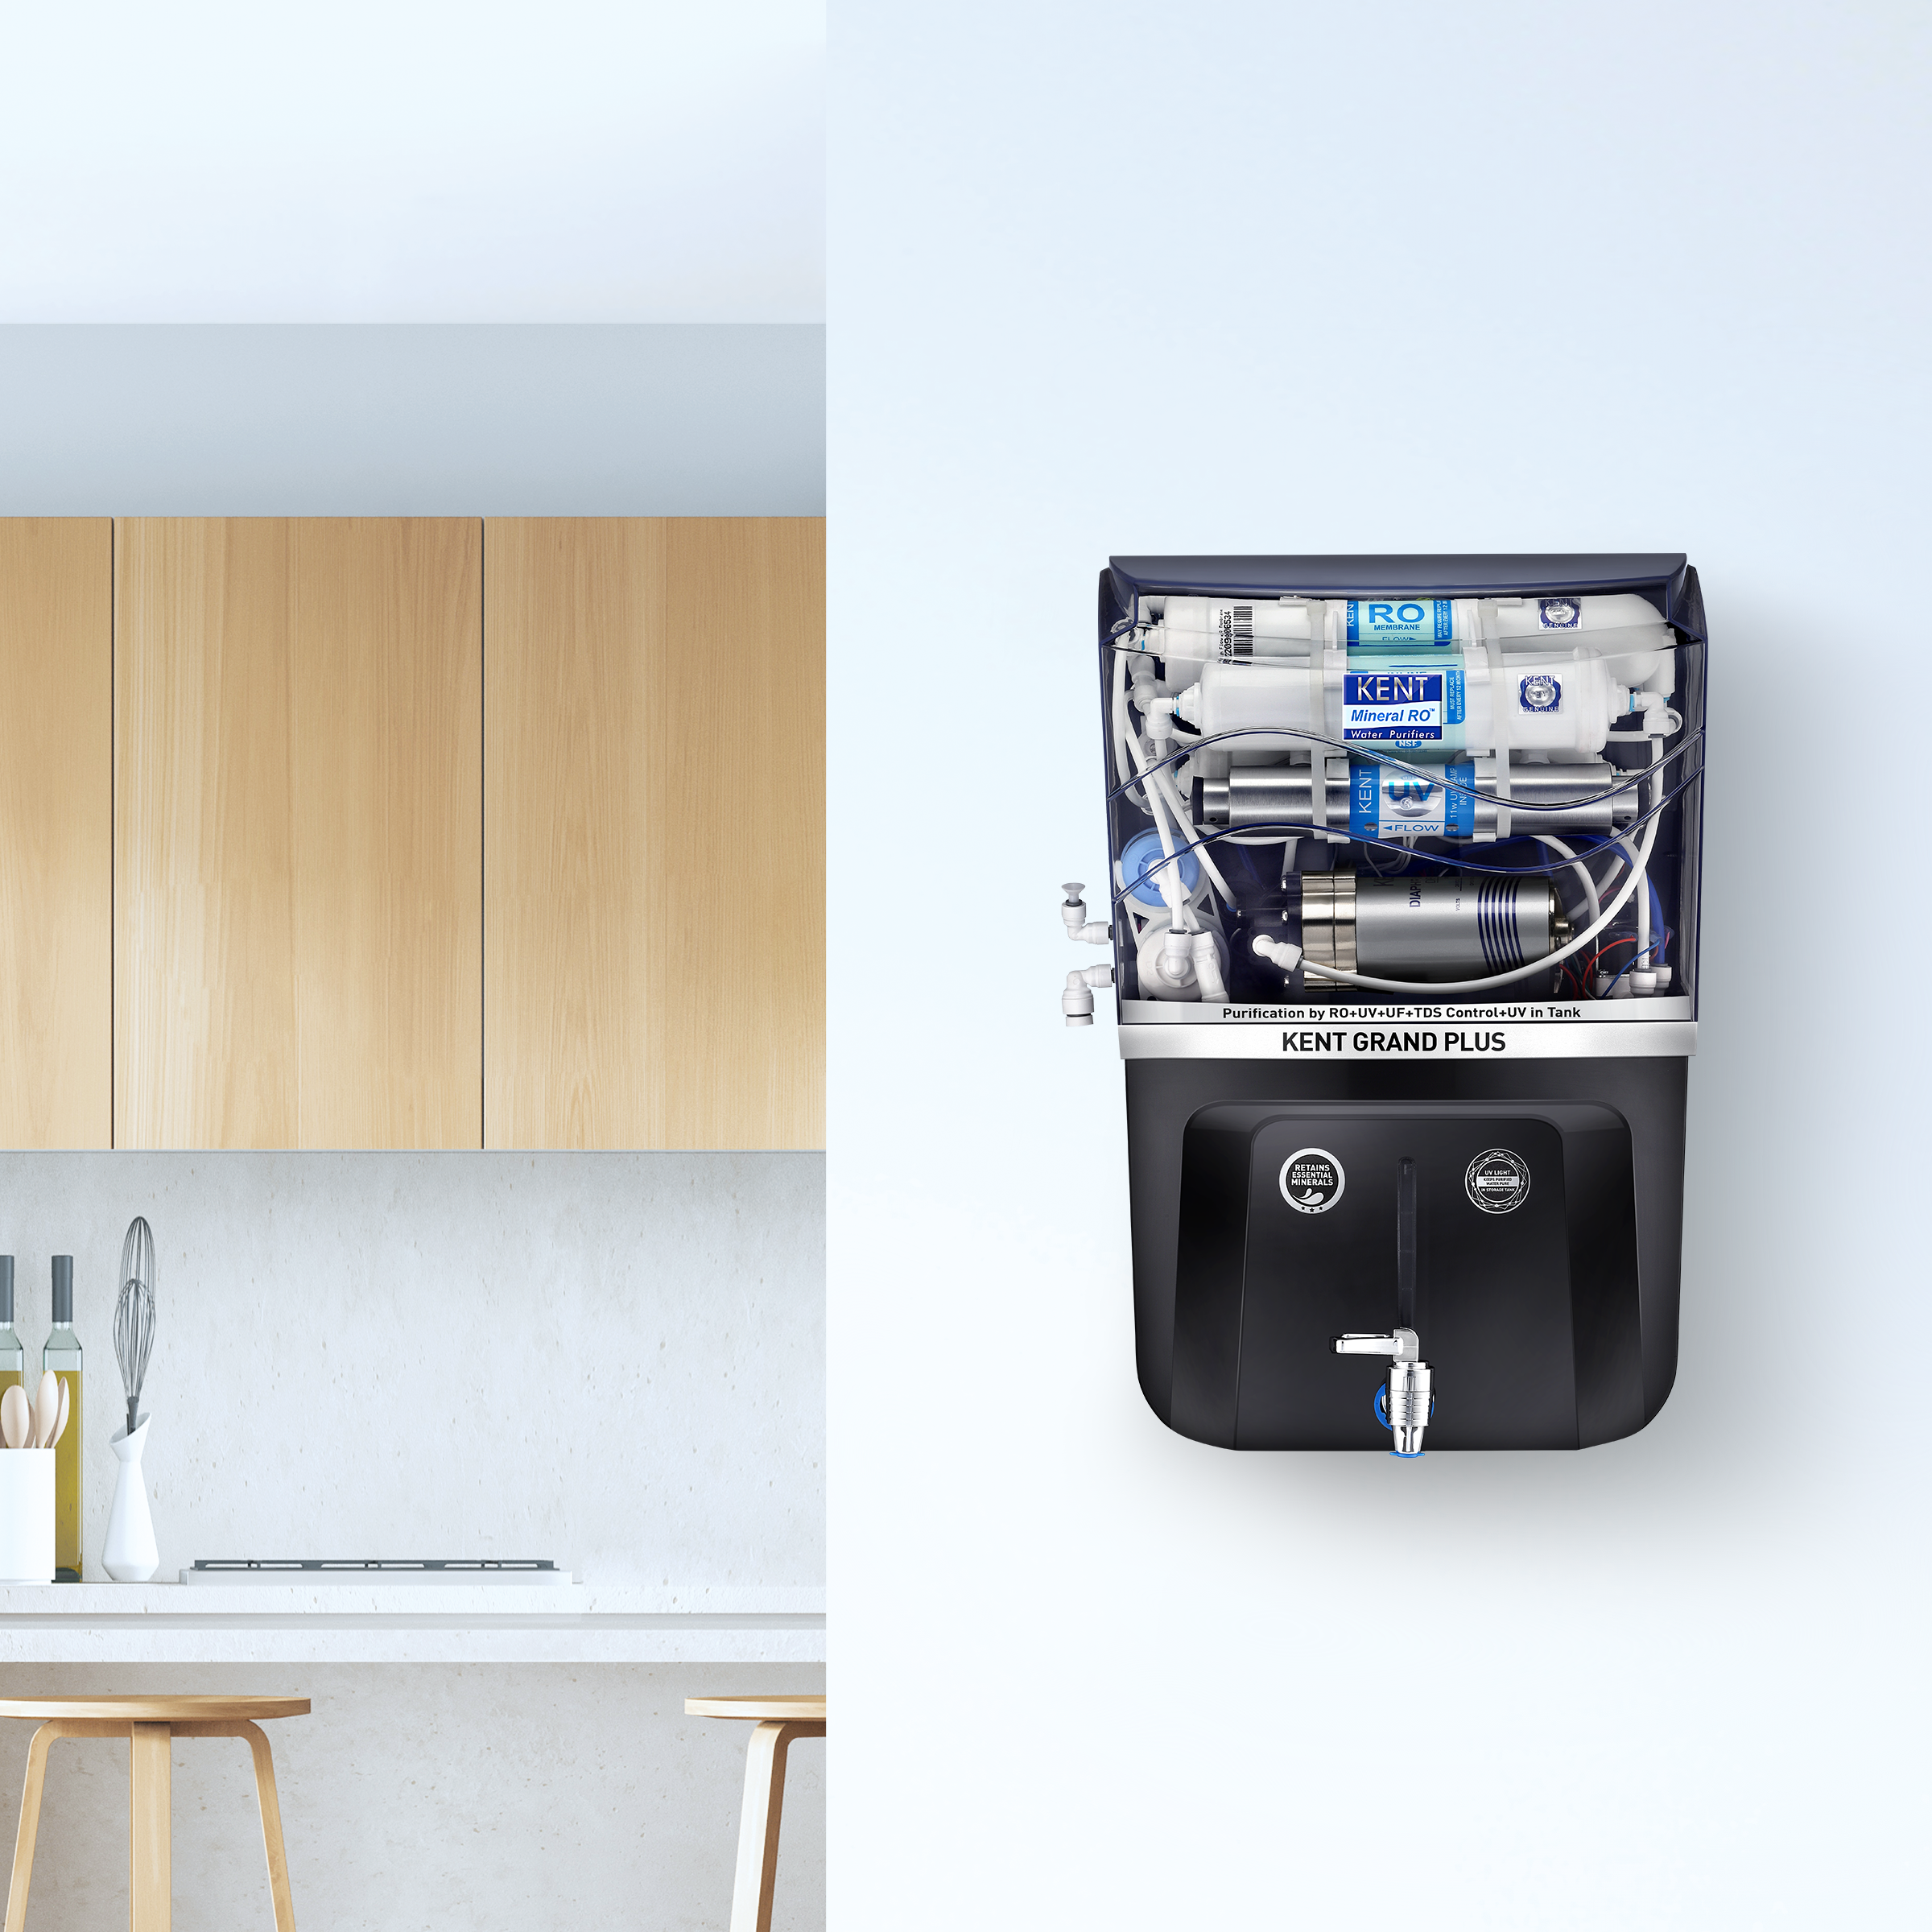 KENT Grand Plus-B Price, Reviews: Water Purifier with RO+UV+UF+TDS